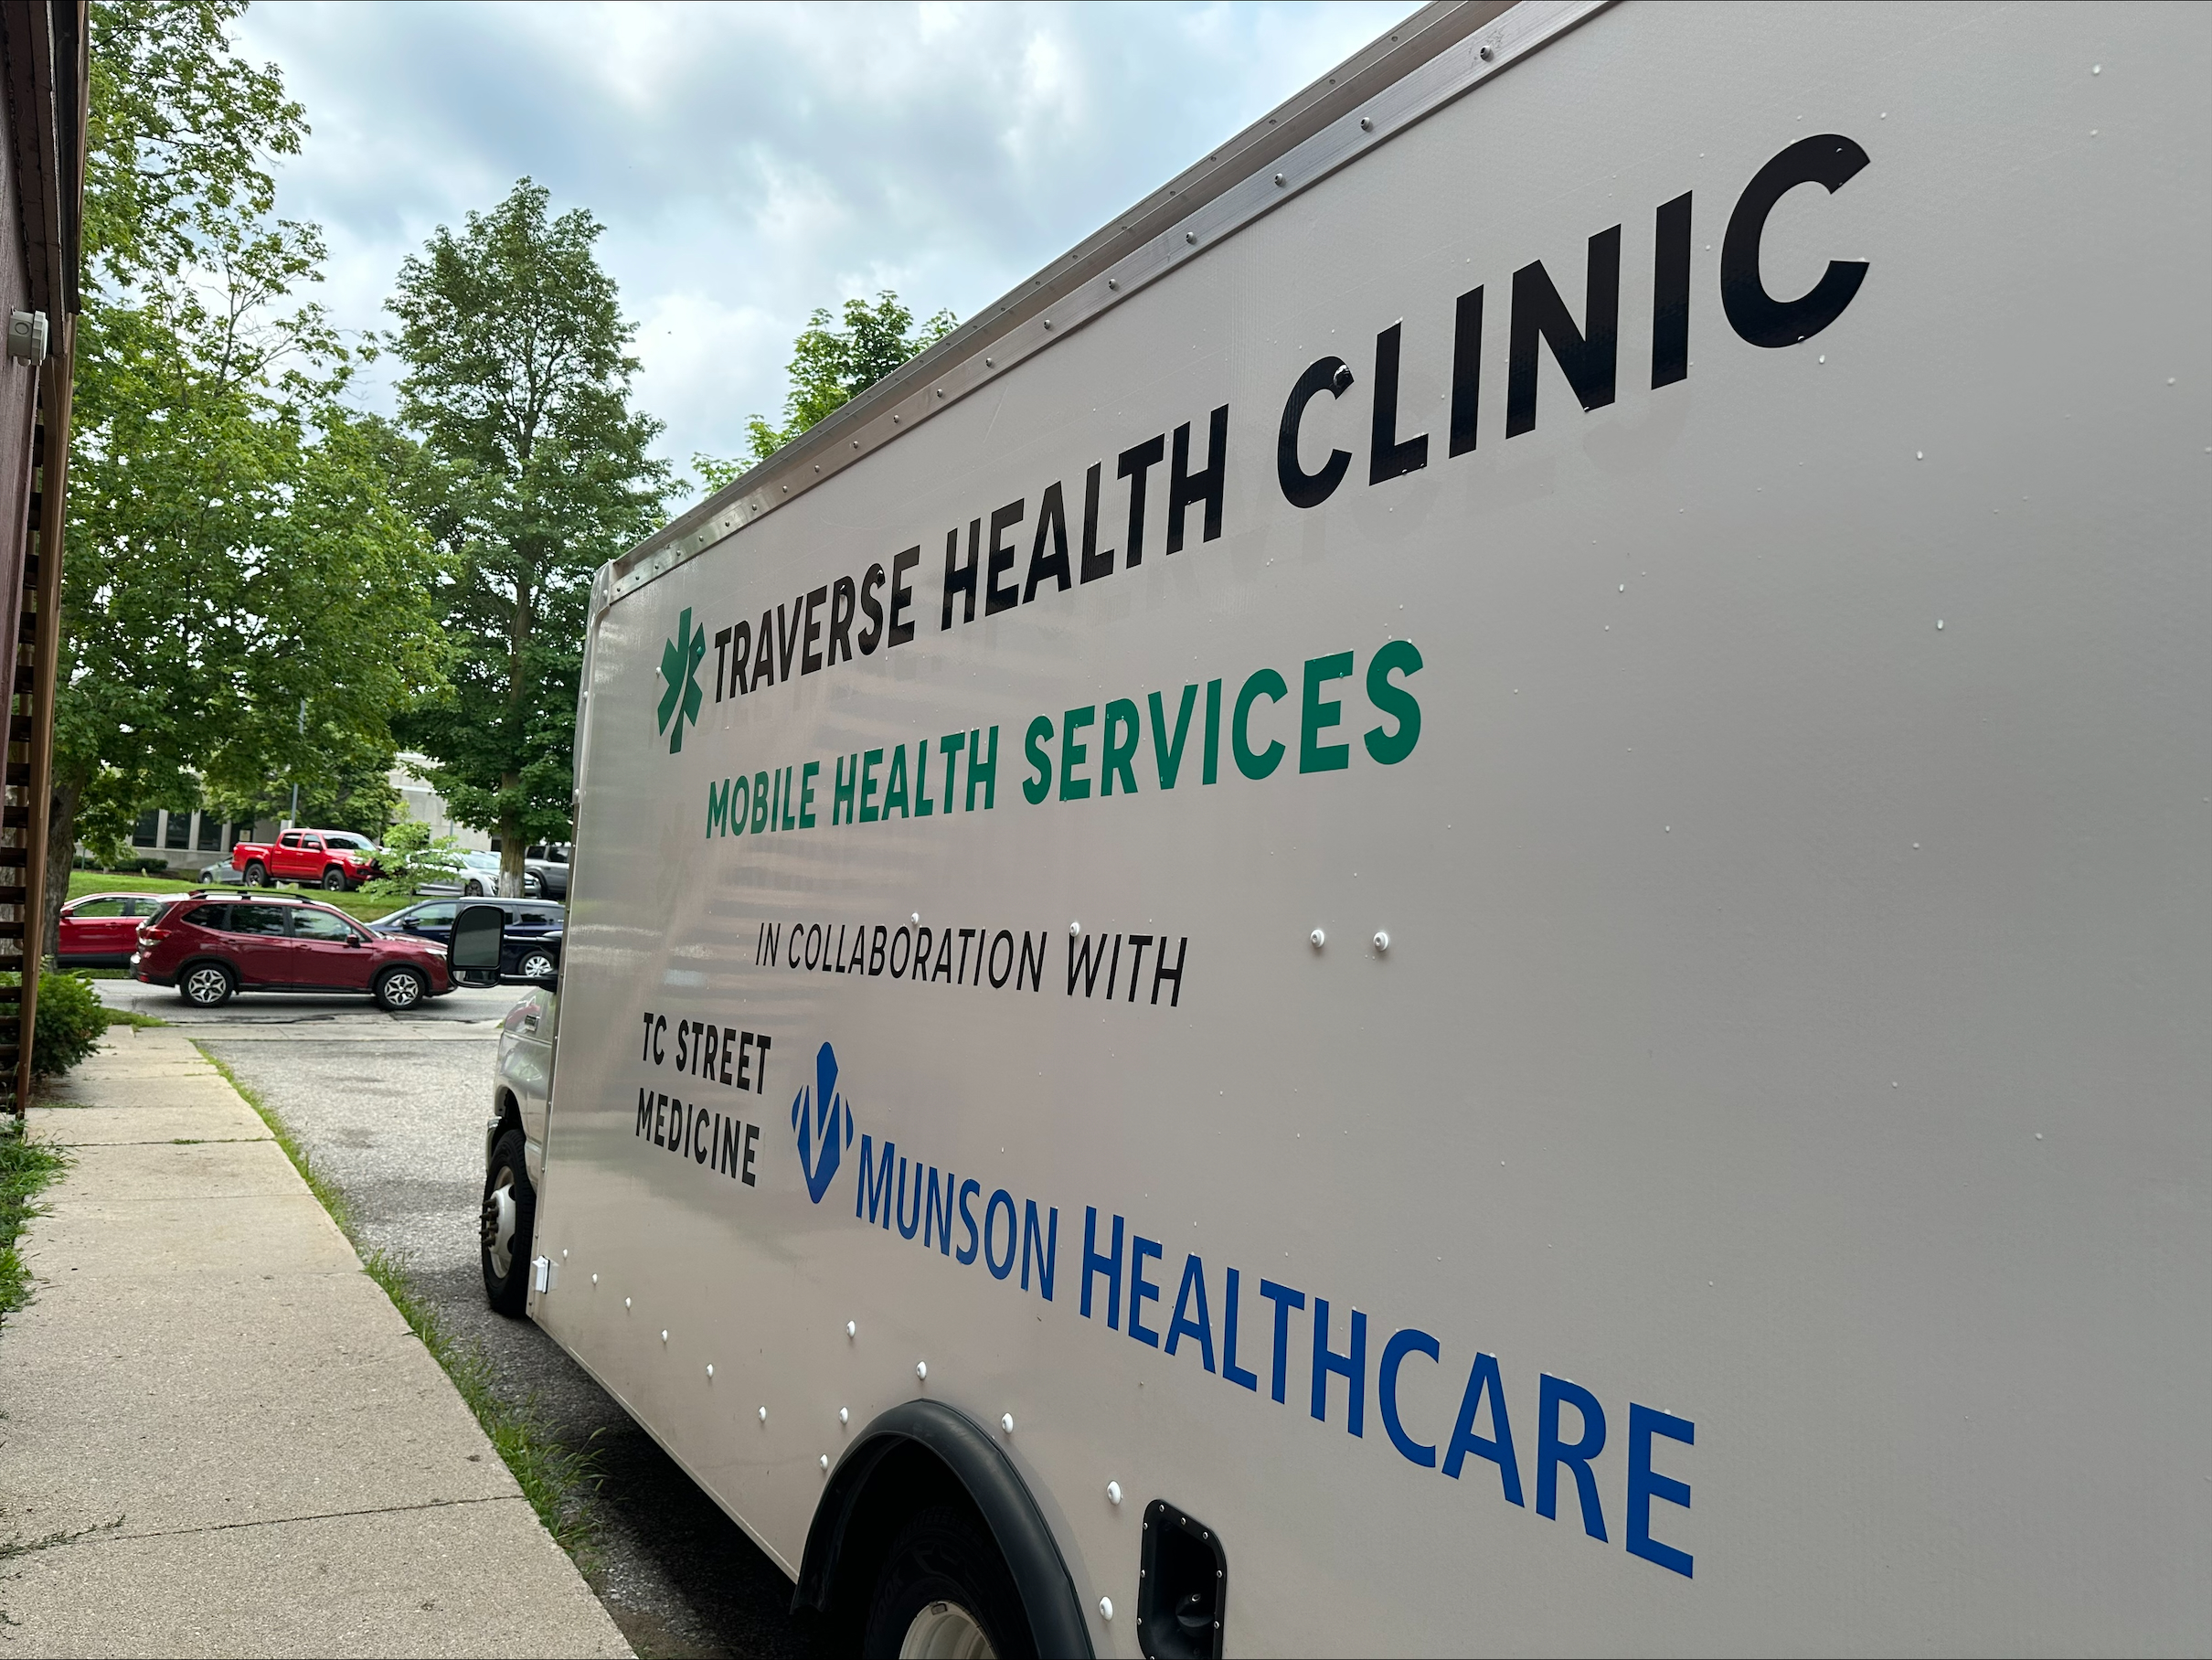 Bringing Medicine to the Homeless: Munson Healthcare Launches Street Medicine Program in Partnership with Traverse Health Clinic and Goodwill Northern Michigan’s Street Outreach Team